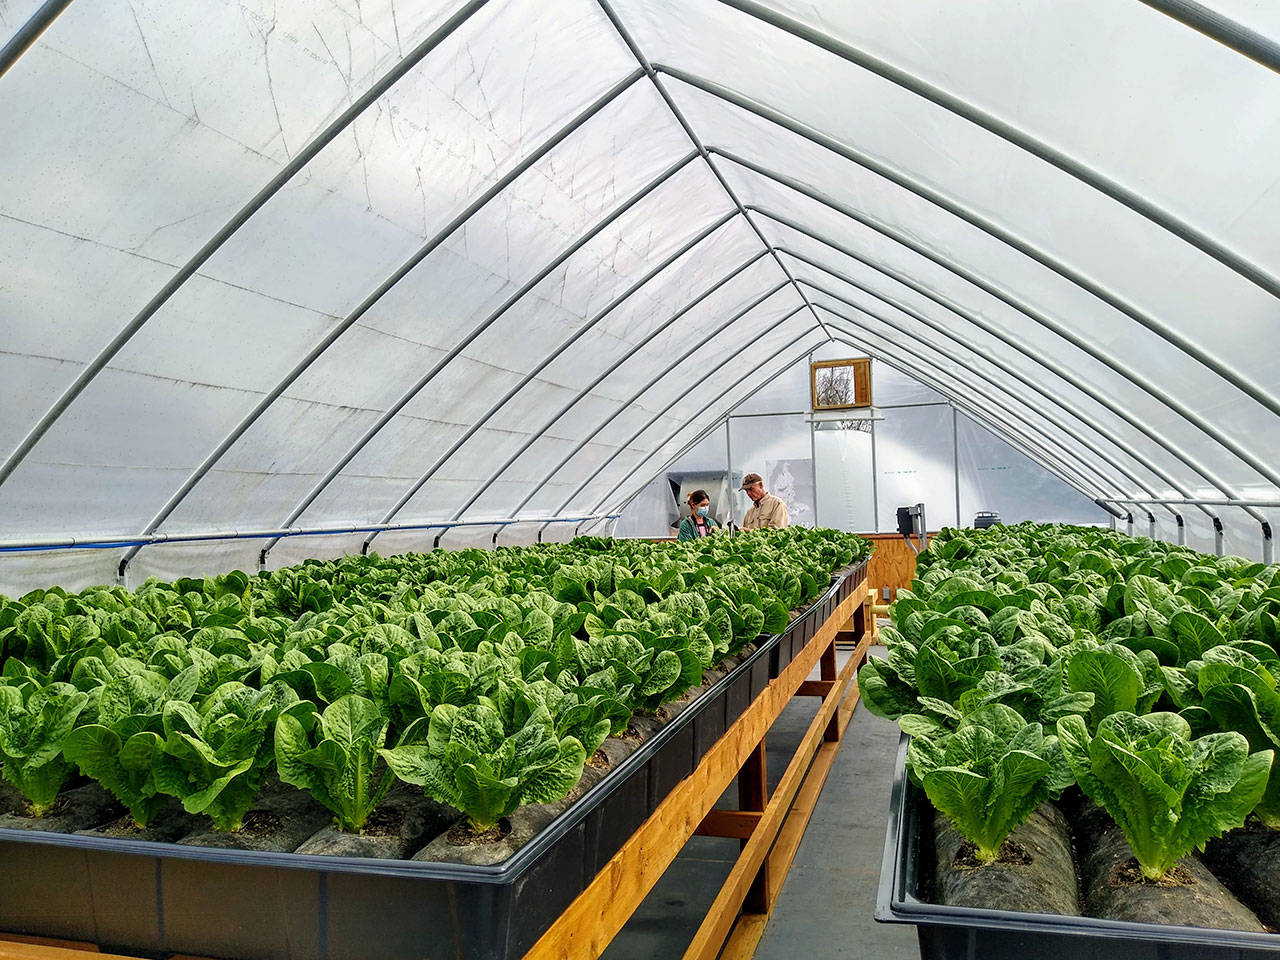 Vashon’s “food to fuel” bioenergy farm hub, debuting last month and built in partnership by Alegría Fresh and Impact Bioenergy, recently showcased rows of heads of lettuce grown in a greenhouse (Paul Rowley/Staff Photo).